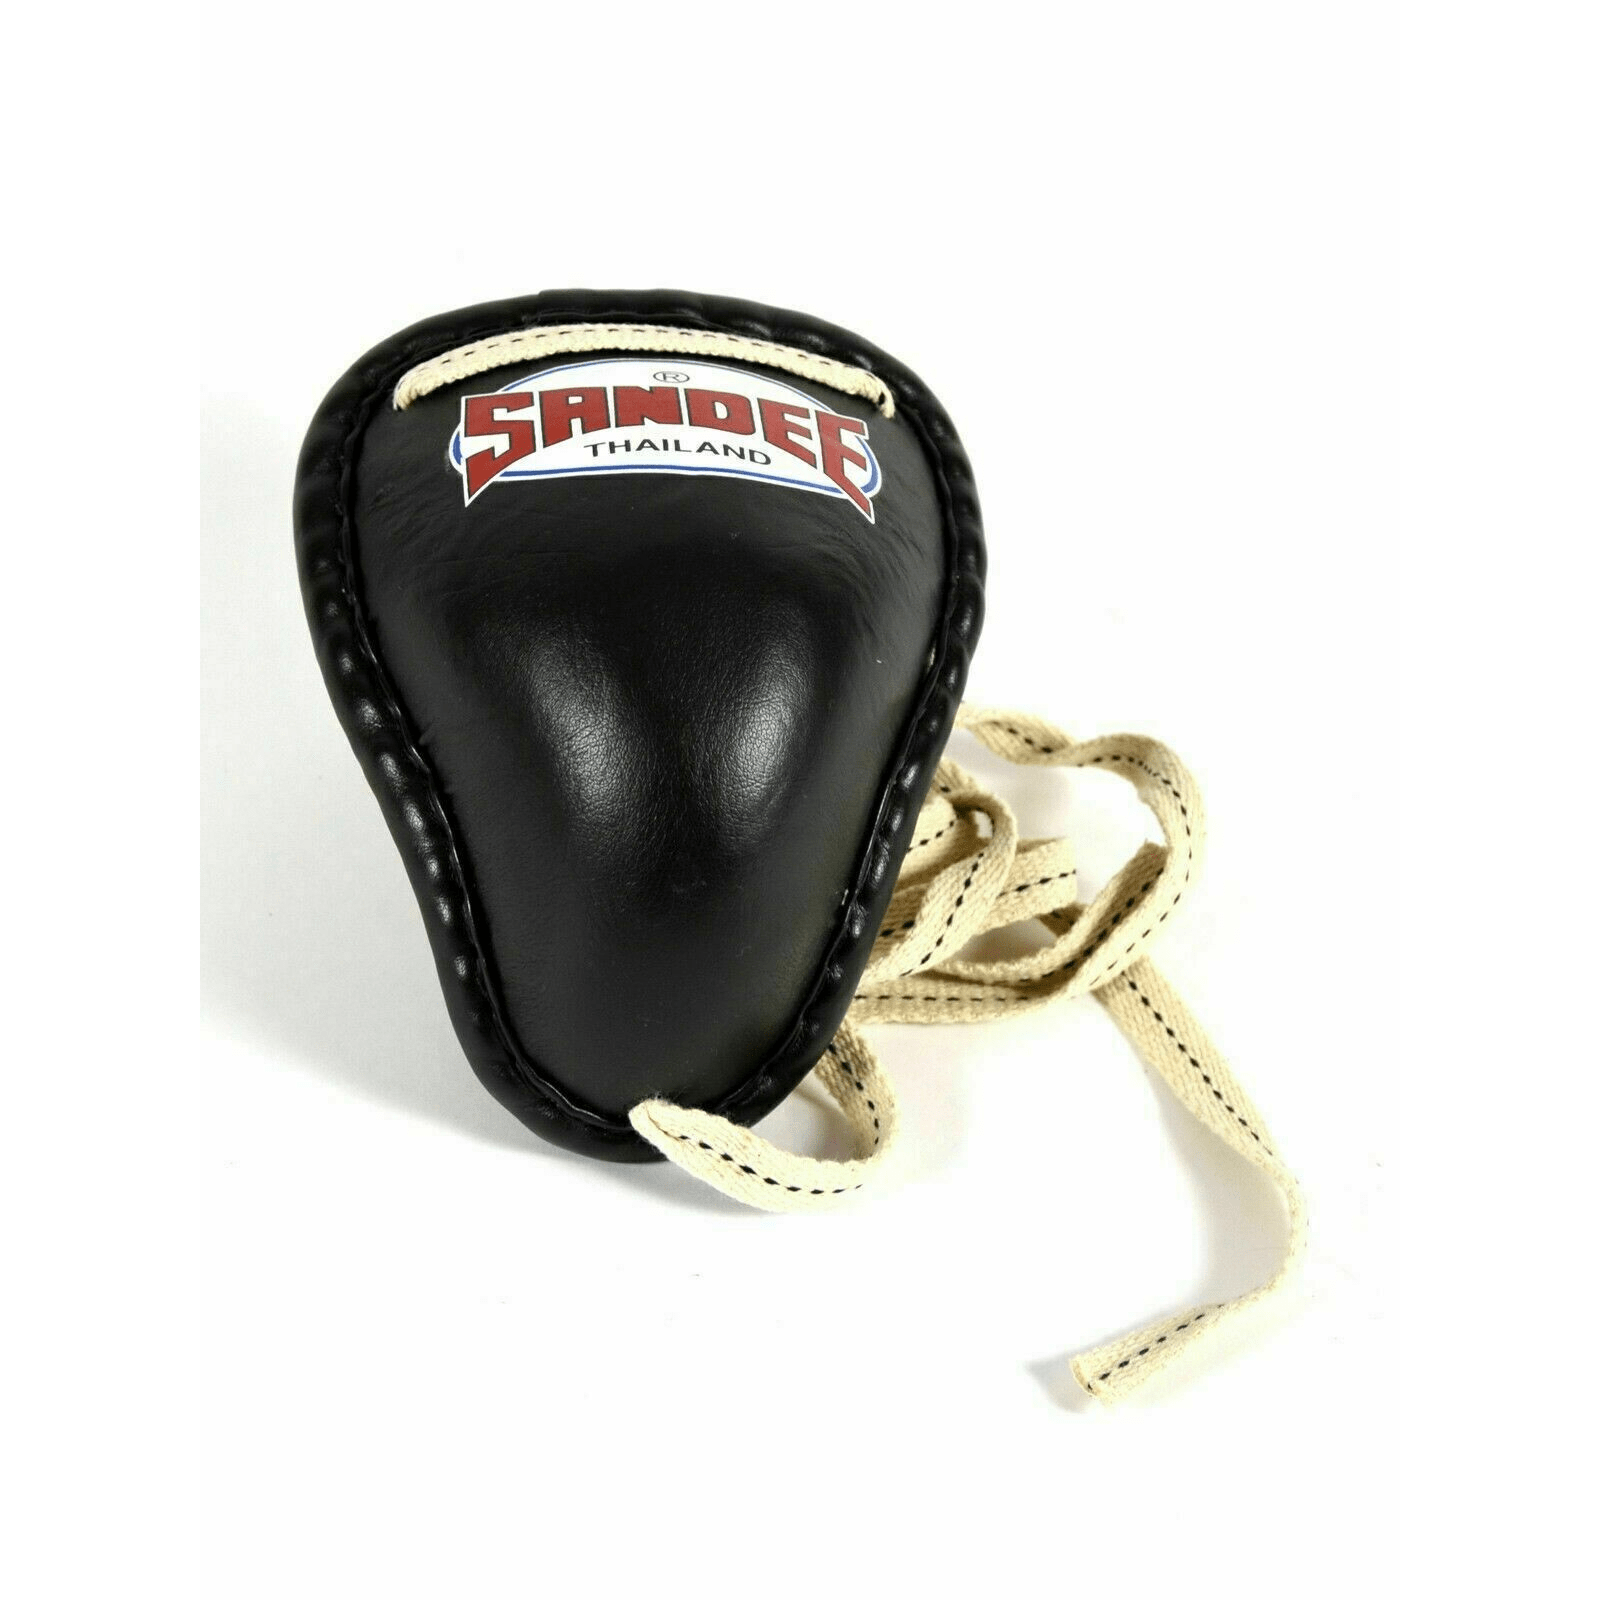 Sandee Adults Groin Guard Muay Thai Black Metal Protection Sparring  Fight Co